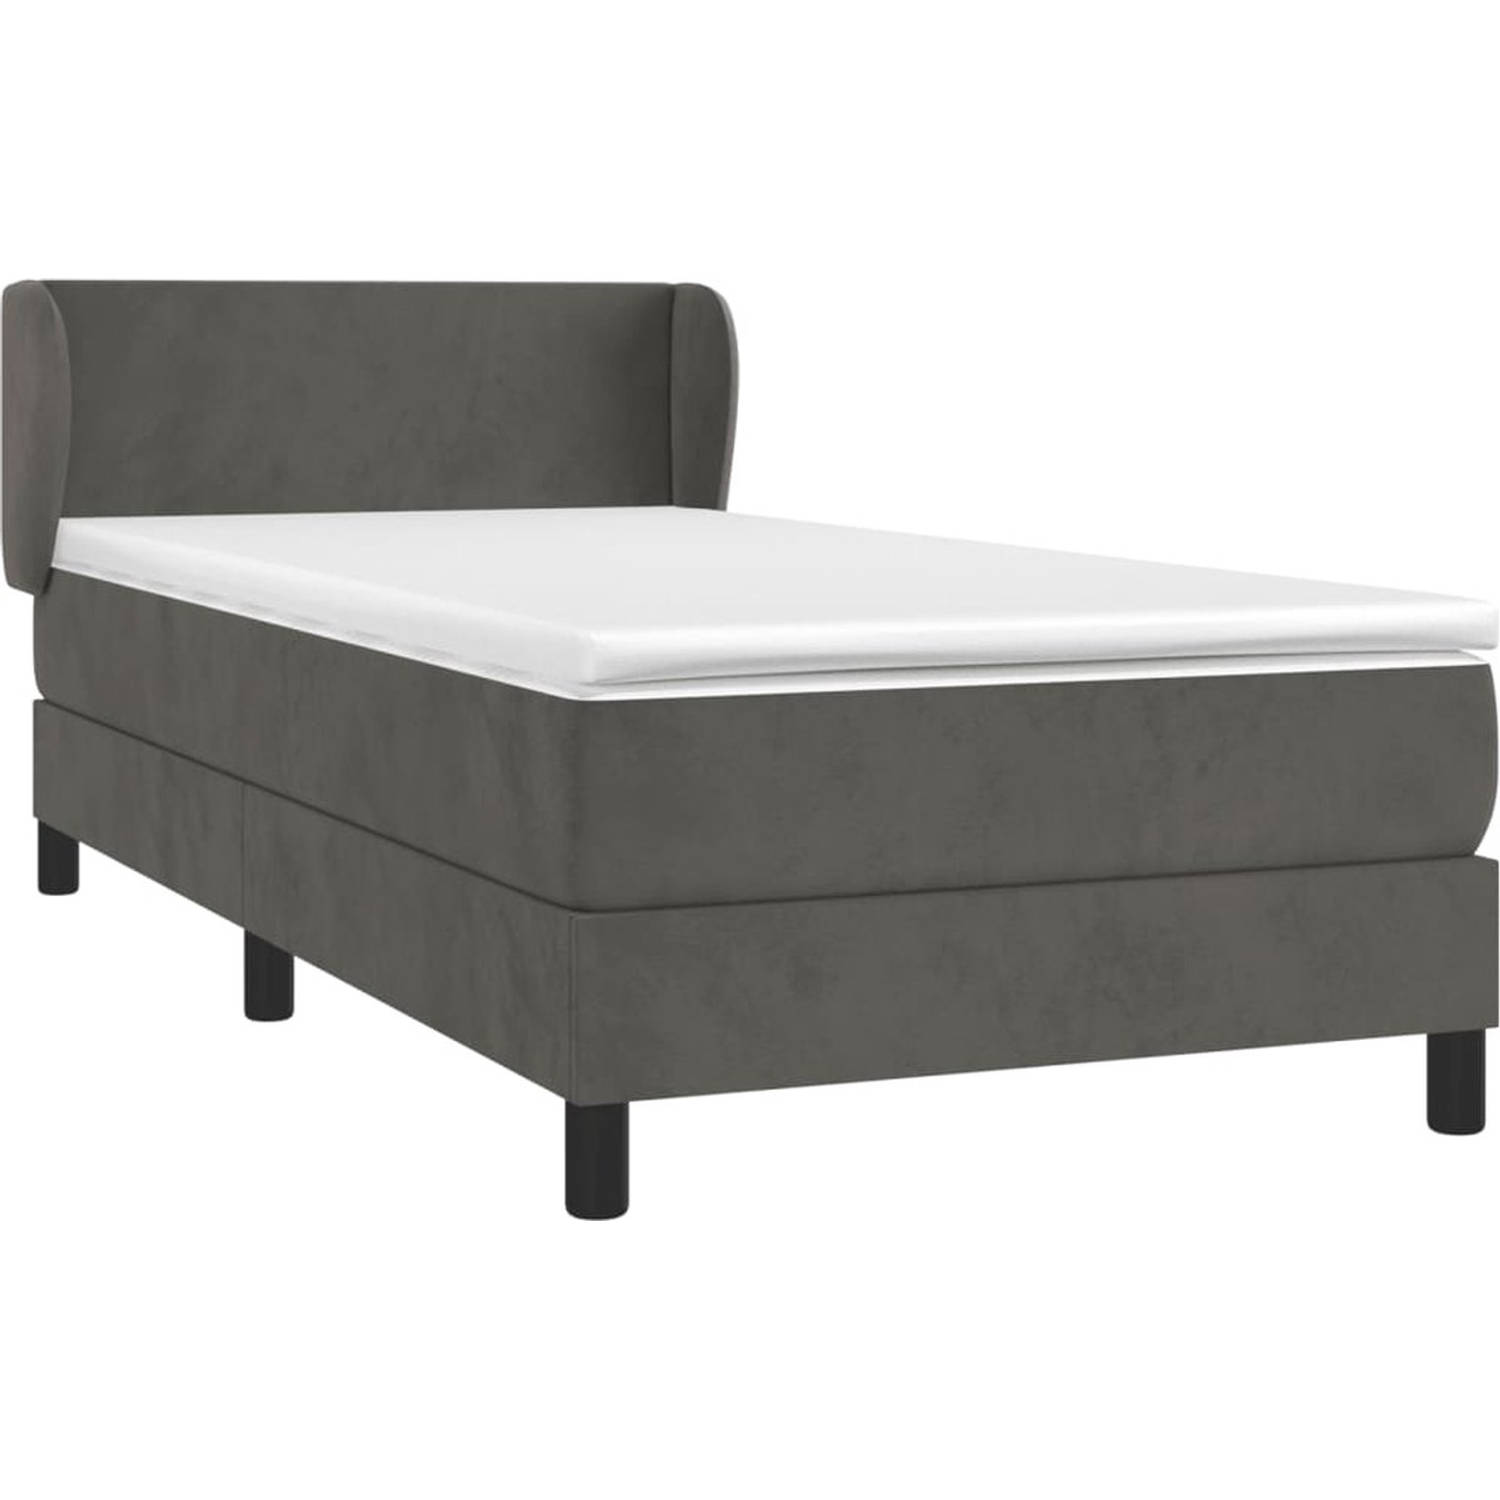 The Living Store Boxspringbed - The Living Store - Bed - 203 x 103 x 78/88 cm - Donkergrijs Fluweel